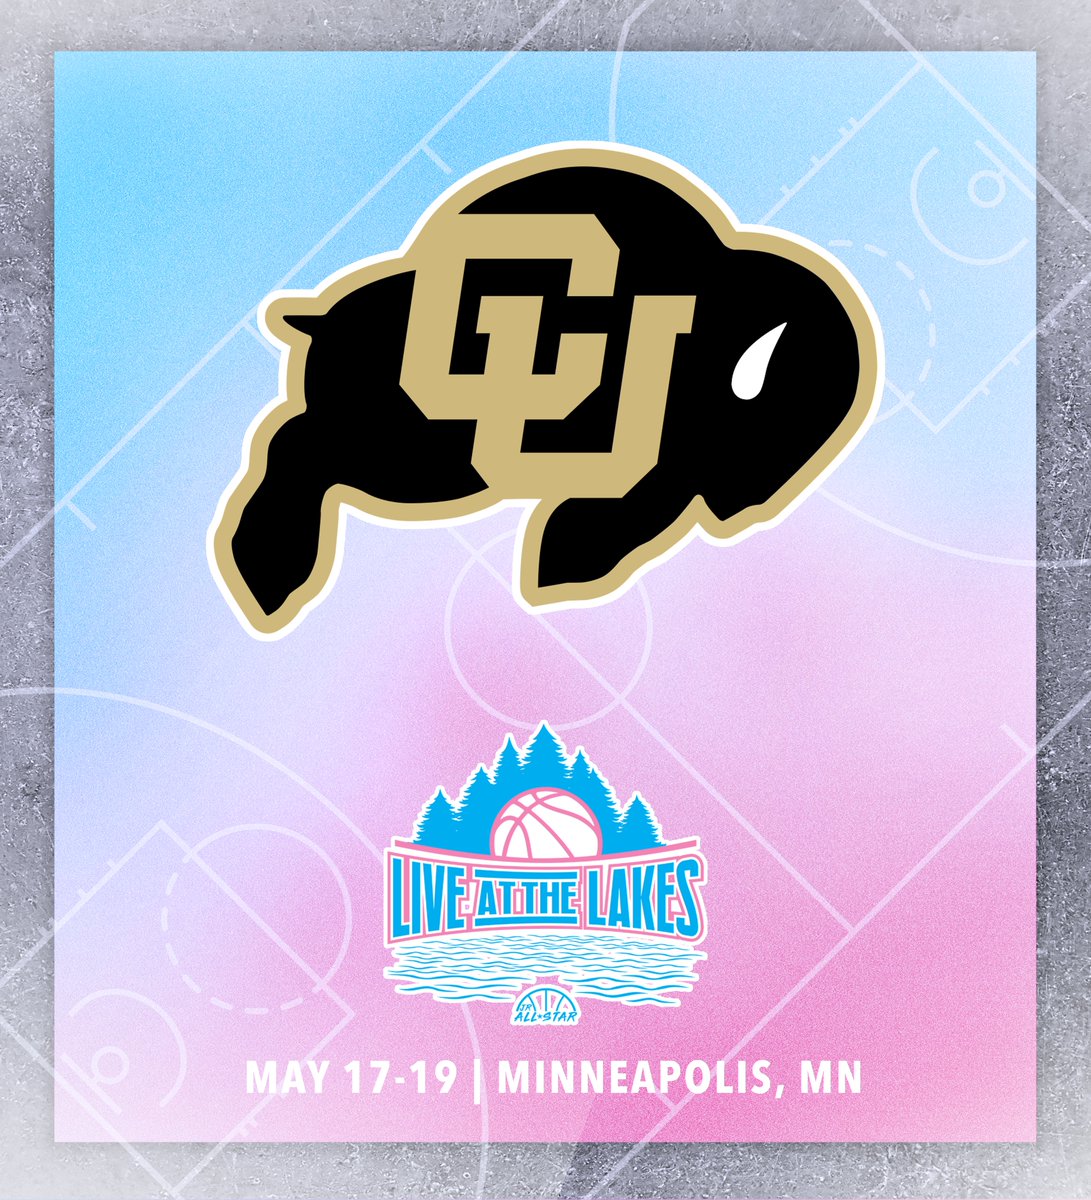 The University of Colorado (@CUBuffsWBB) is registered to attend 𝗟𝗜𝗩𝗘 𝗔𝗧 𝗧𝗛𝗘 𝗟𝗔𝗞𝗘𝗦! Join them in watching some of the nation’s best during the May Viewing Period.👇 jrallstar.com/exposure-event…